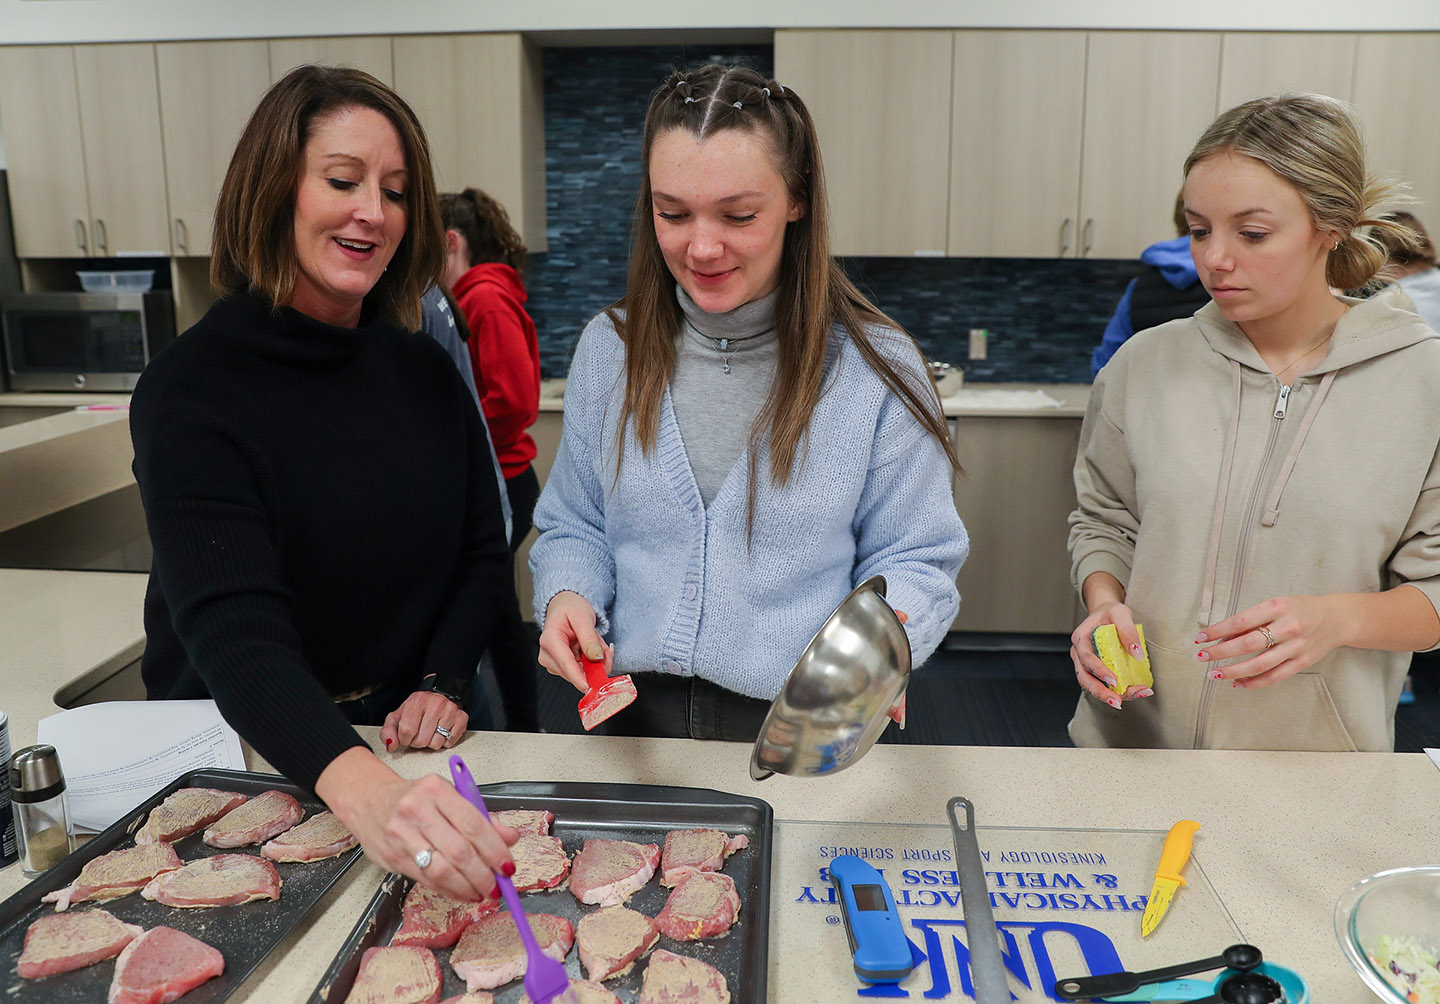 Kaiti George, left, shares her passion for nutrition and dietetics with students at UNK, where she’s a lecturer in the Department of Kinesiology and Sport Sciences.